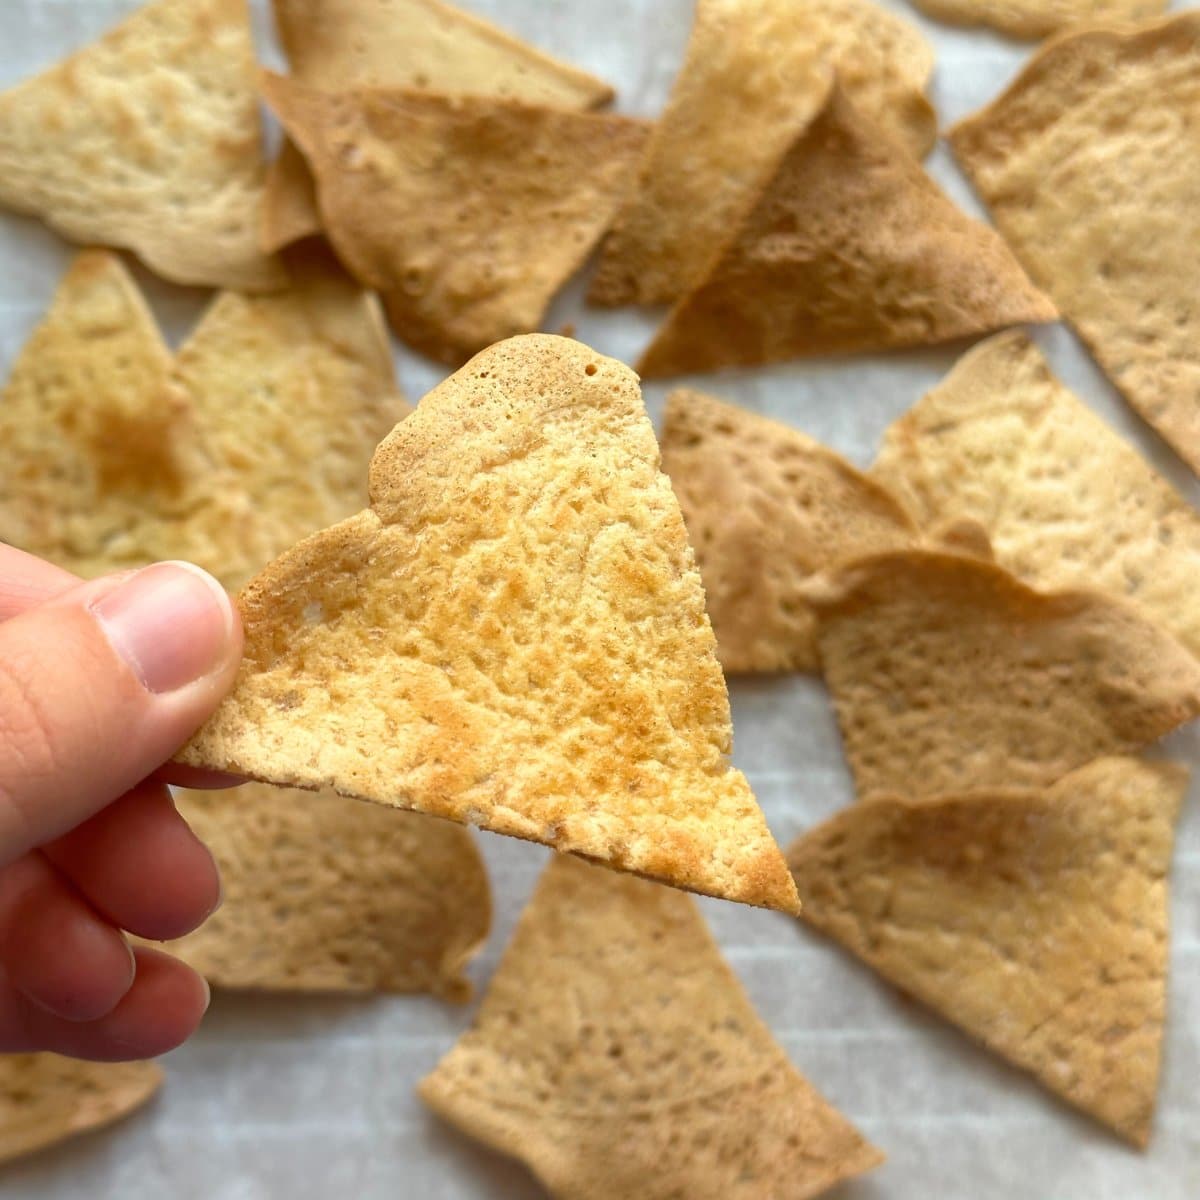 Chickpea flour tortilla chip held up in front of a sheet of more baked chickpea flour tortillas chips.